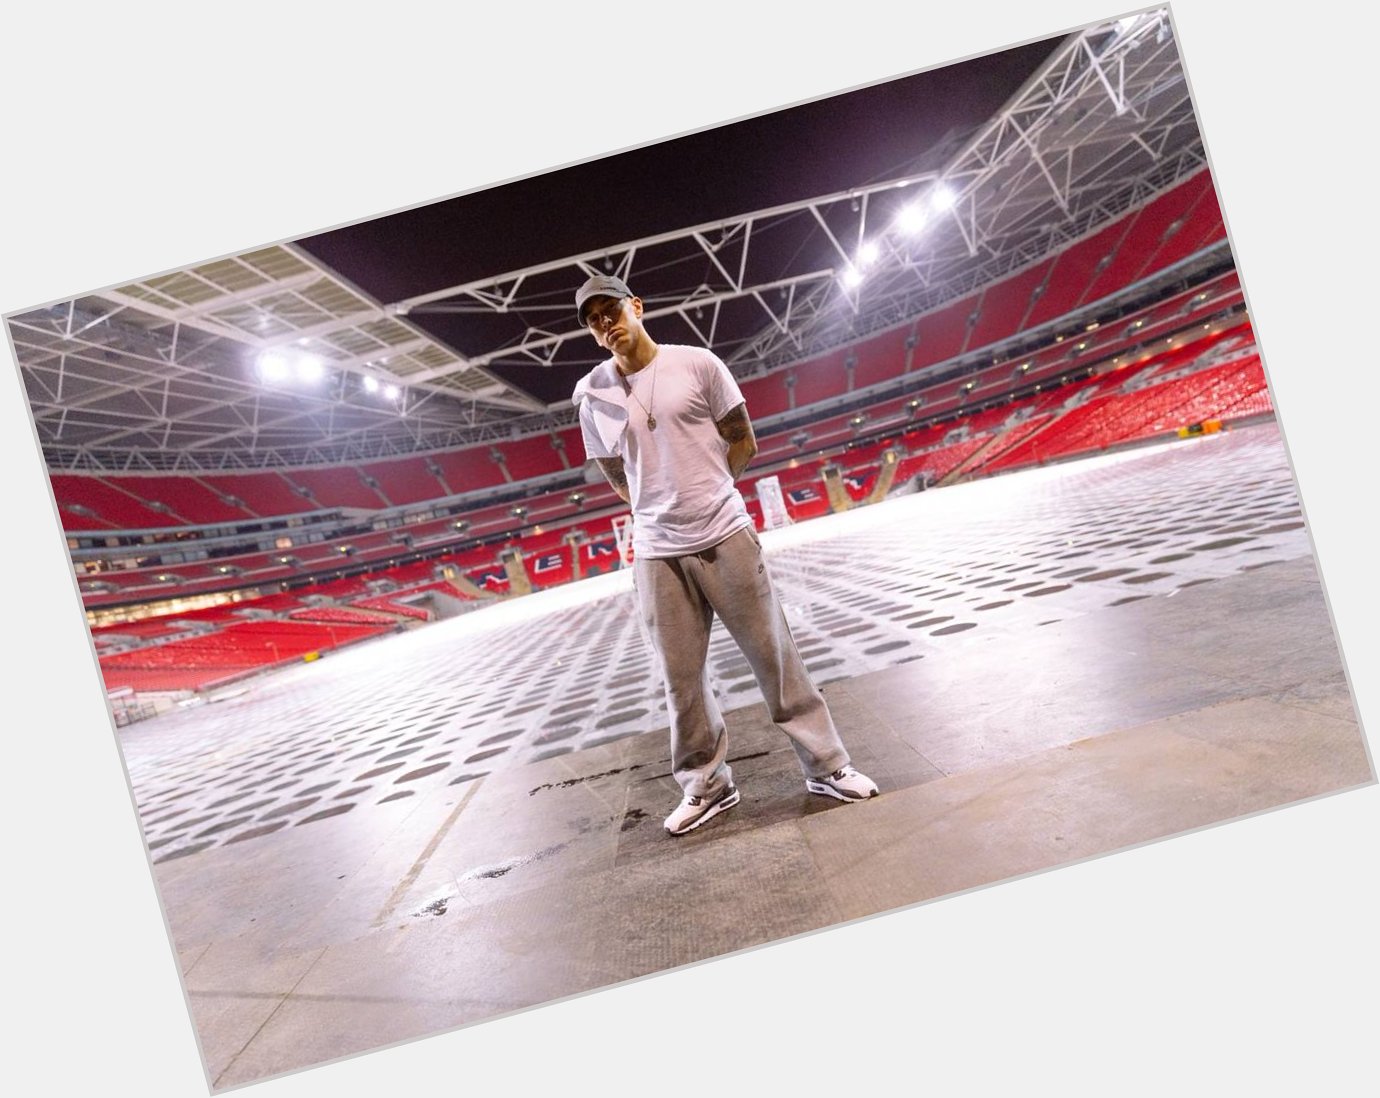 Hurray!!!
The first rapper EVER to headline Wembley Stadium. Happy birthday  